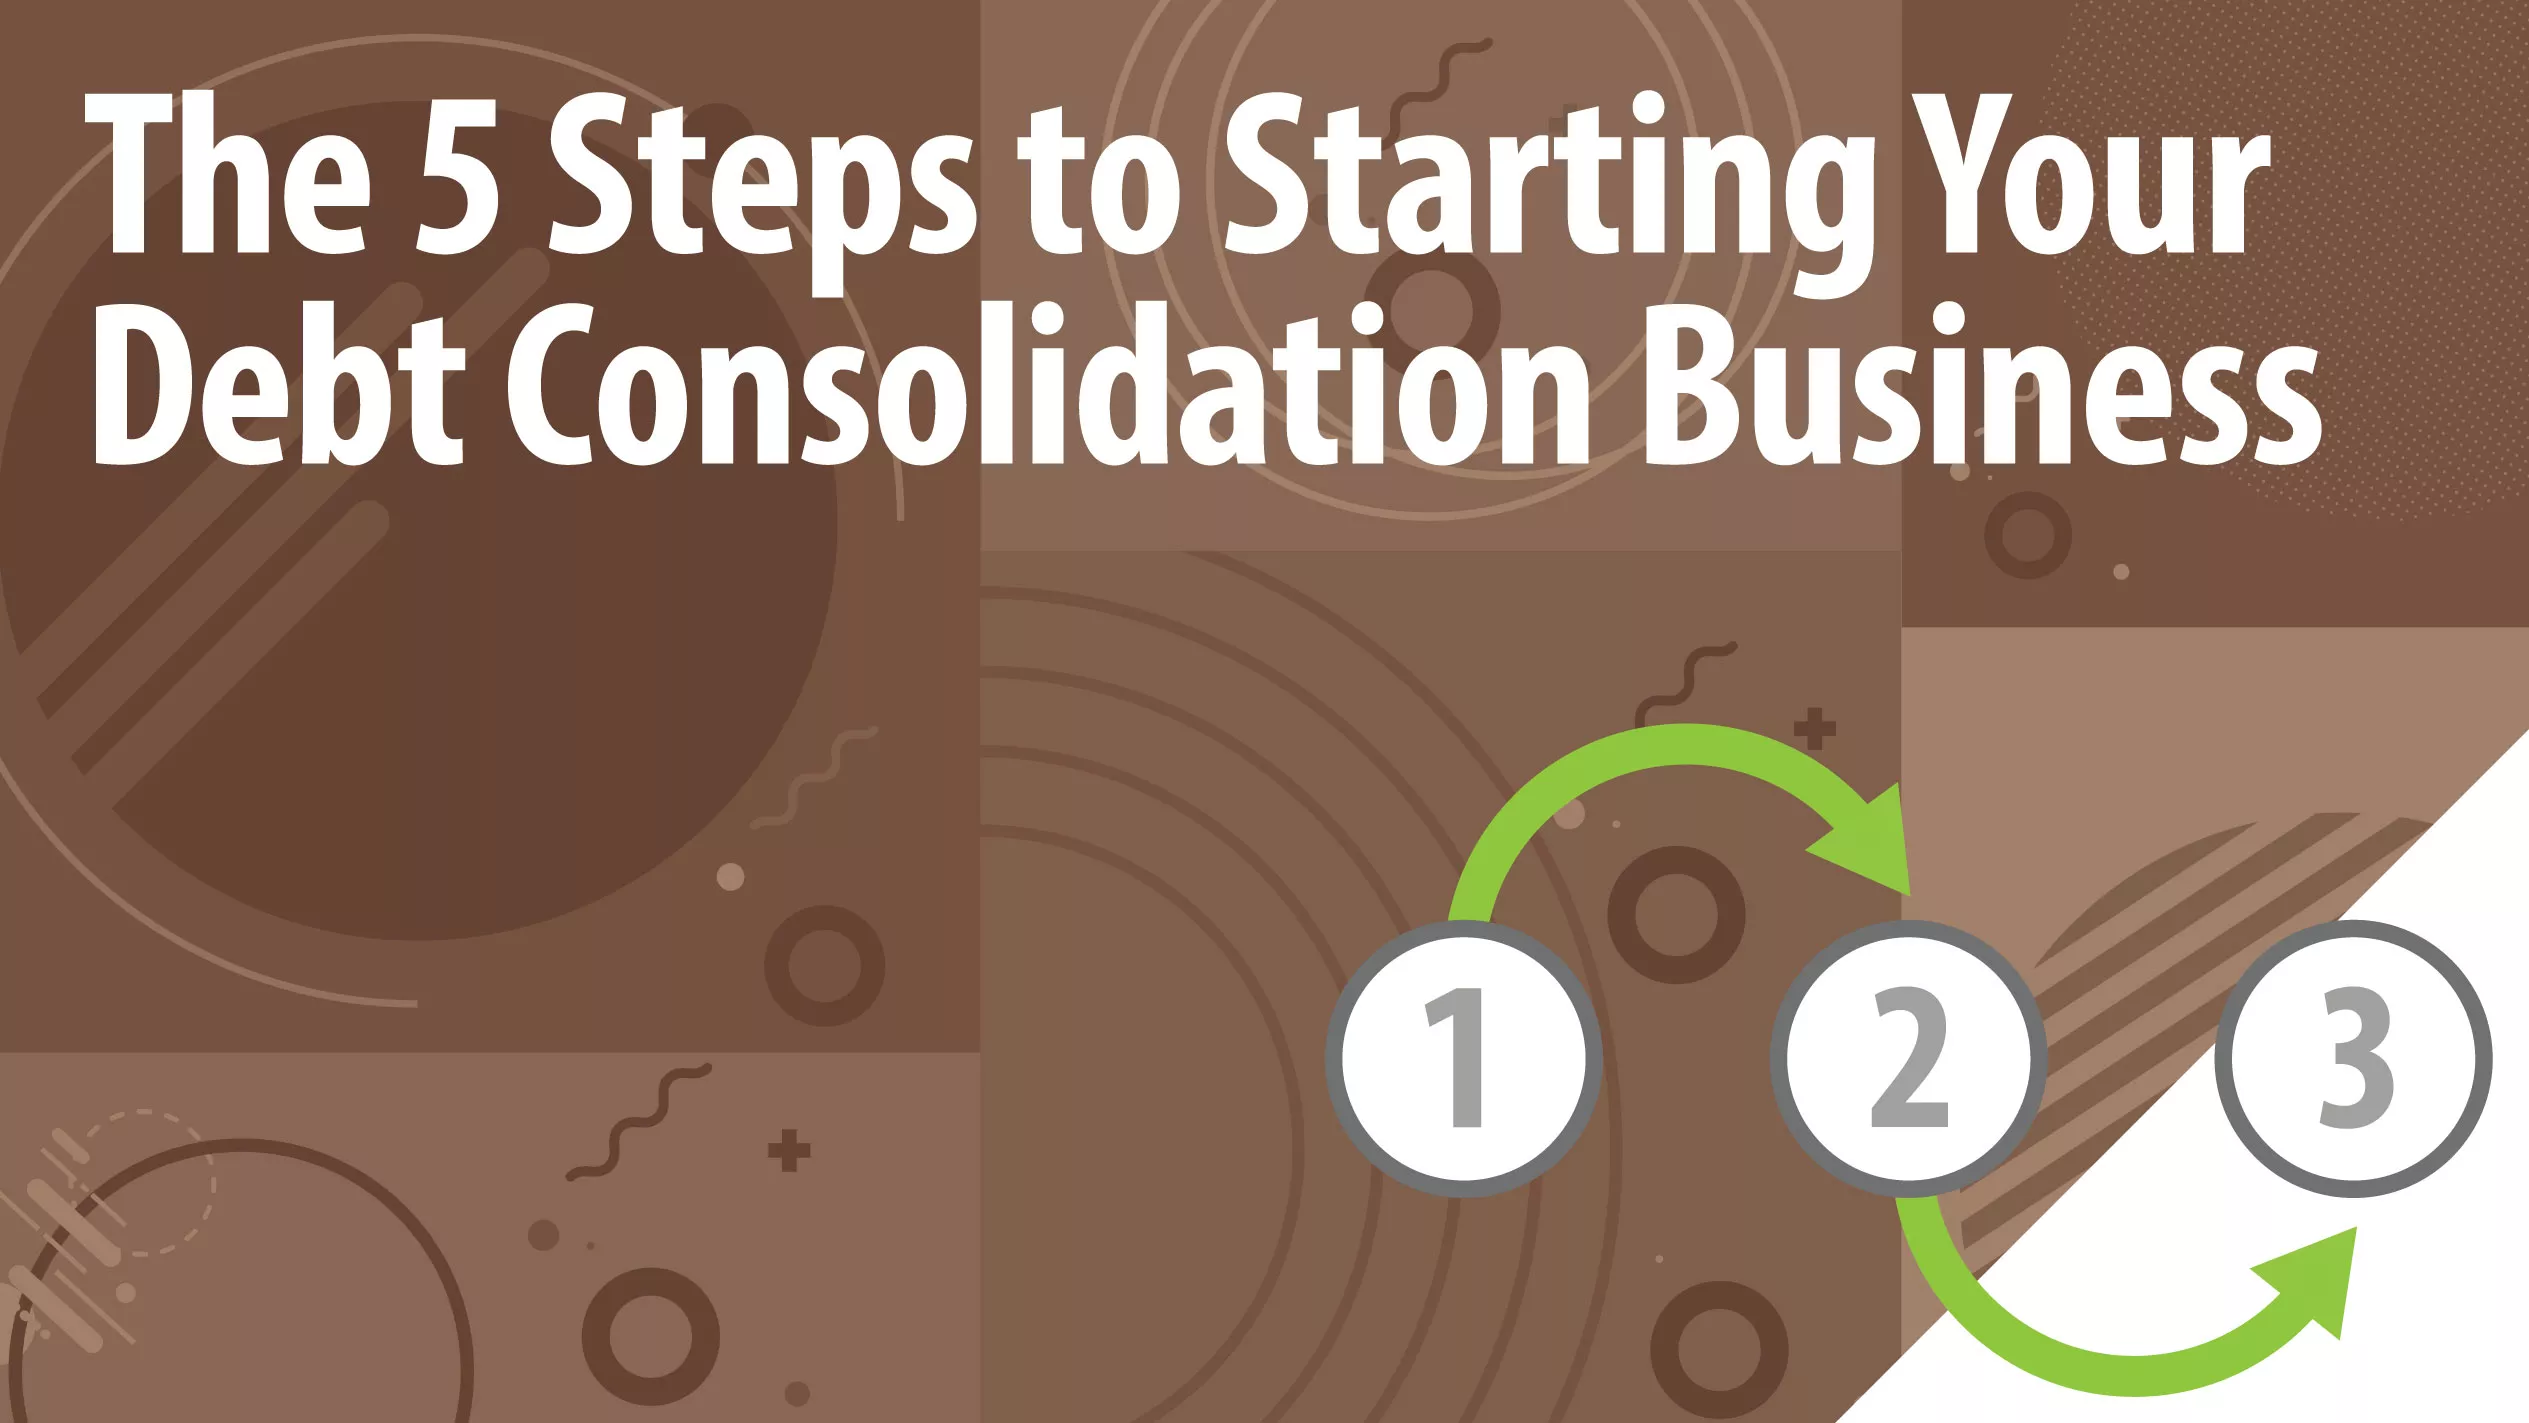 5 Steps to Debt Consolidation Article Header